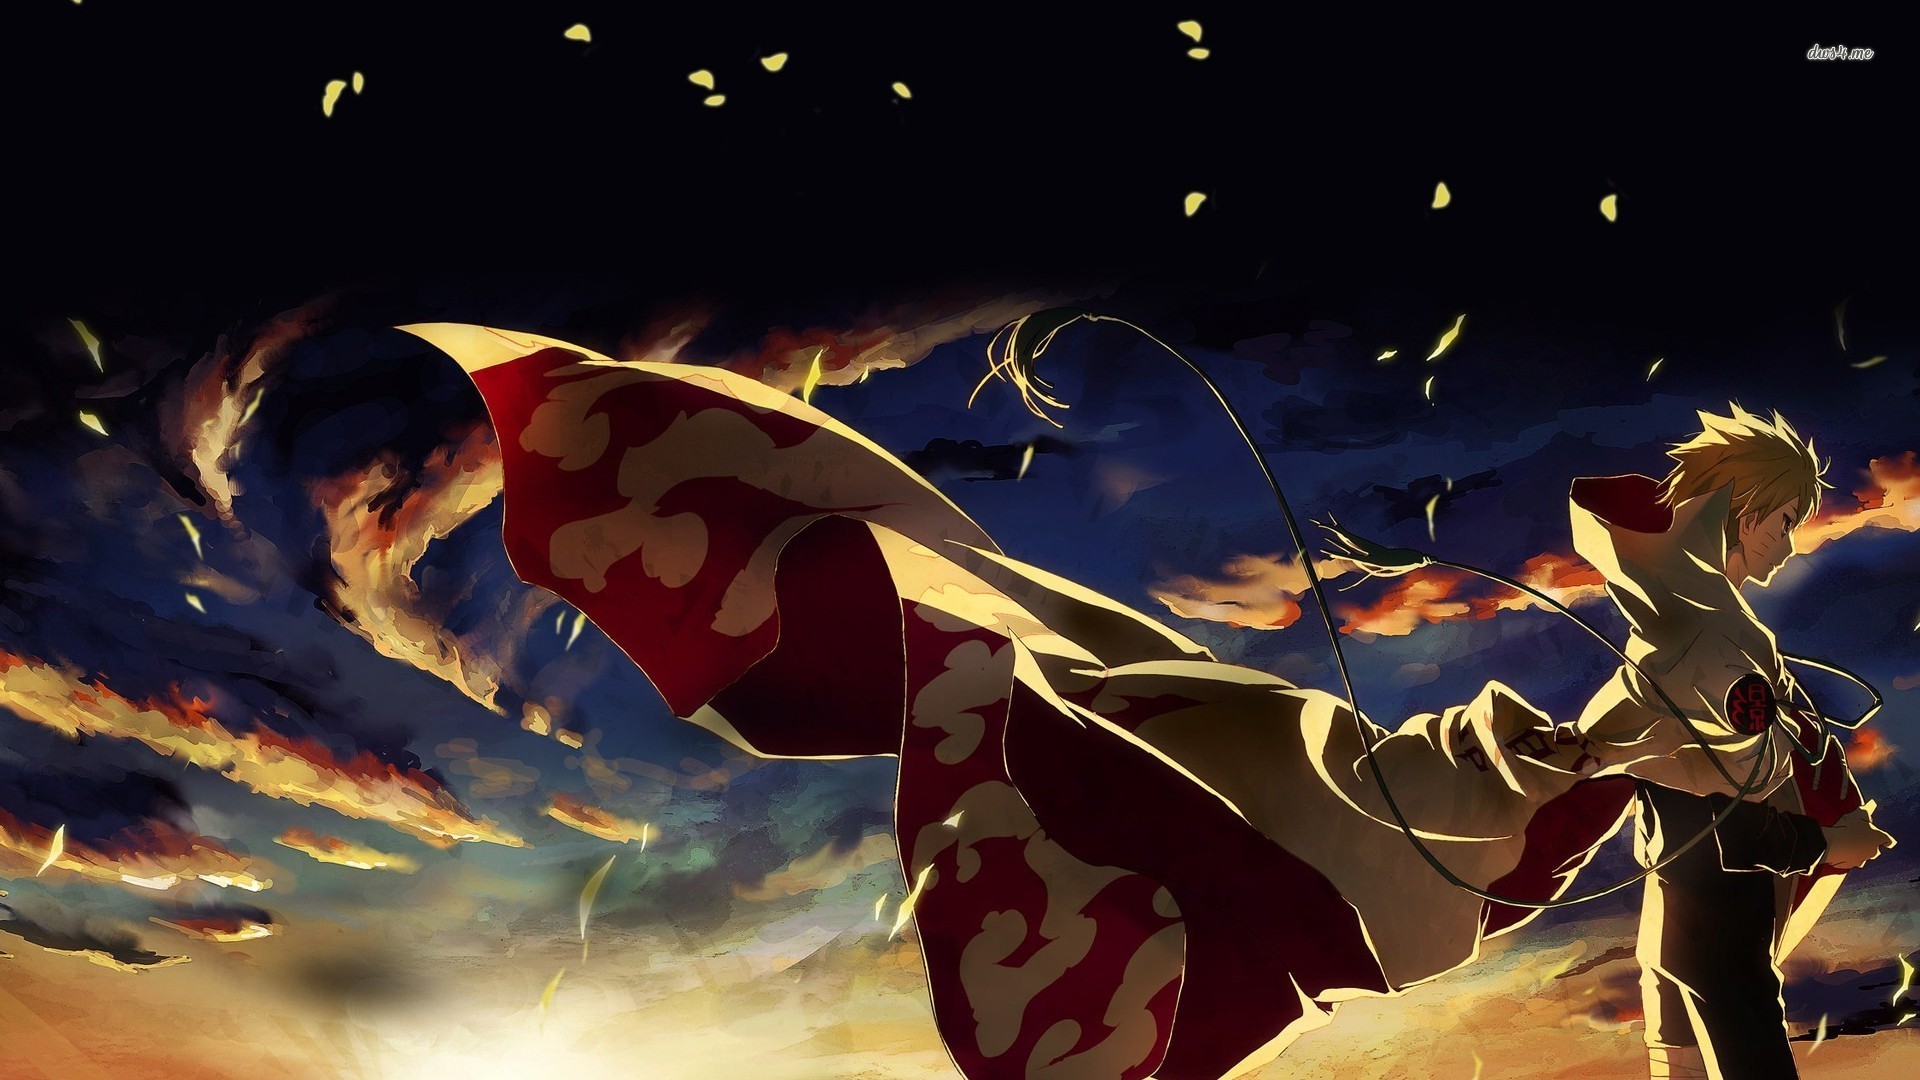 1920x1080 Naruto HD Wallpapers and Backgrounds Best Naruto Wallpapers Wallpapers)